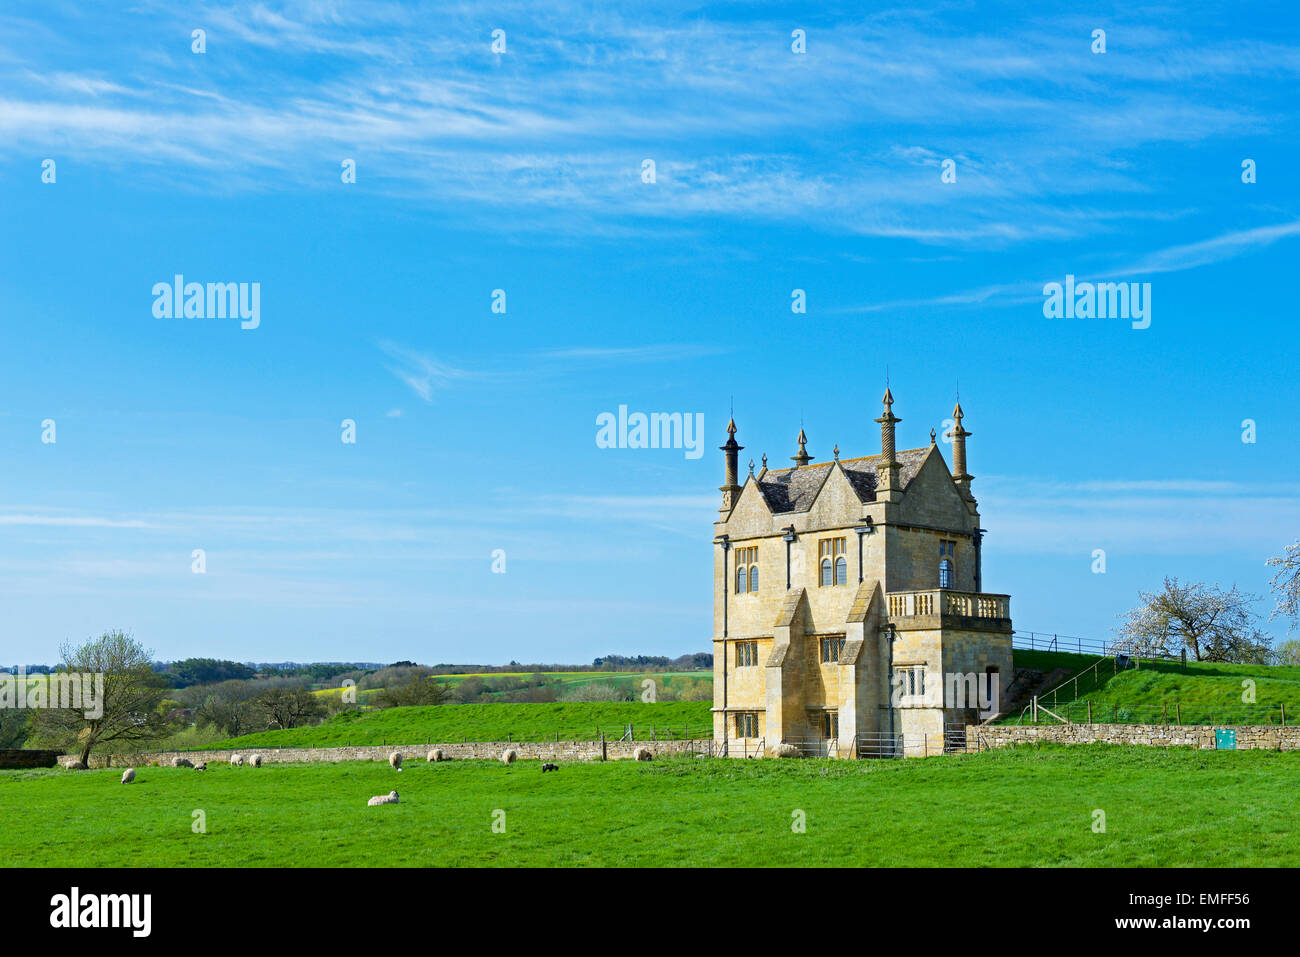 Im Osten Banqueting House, Chipping Campden, Gloucestershire, Cotswolds, England UK Stockfoto